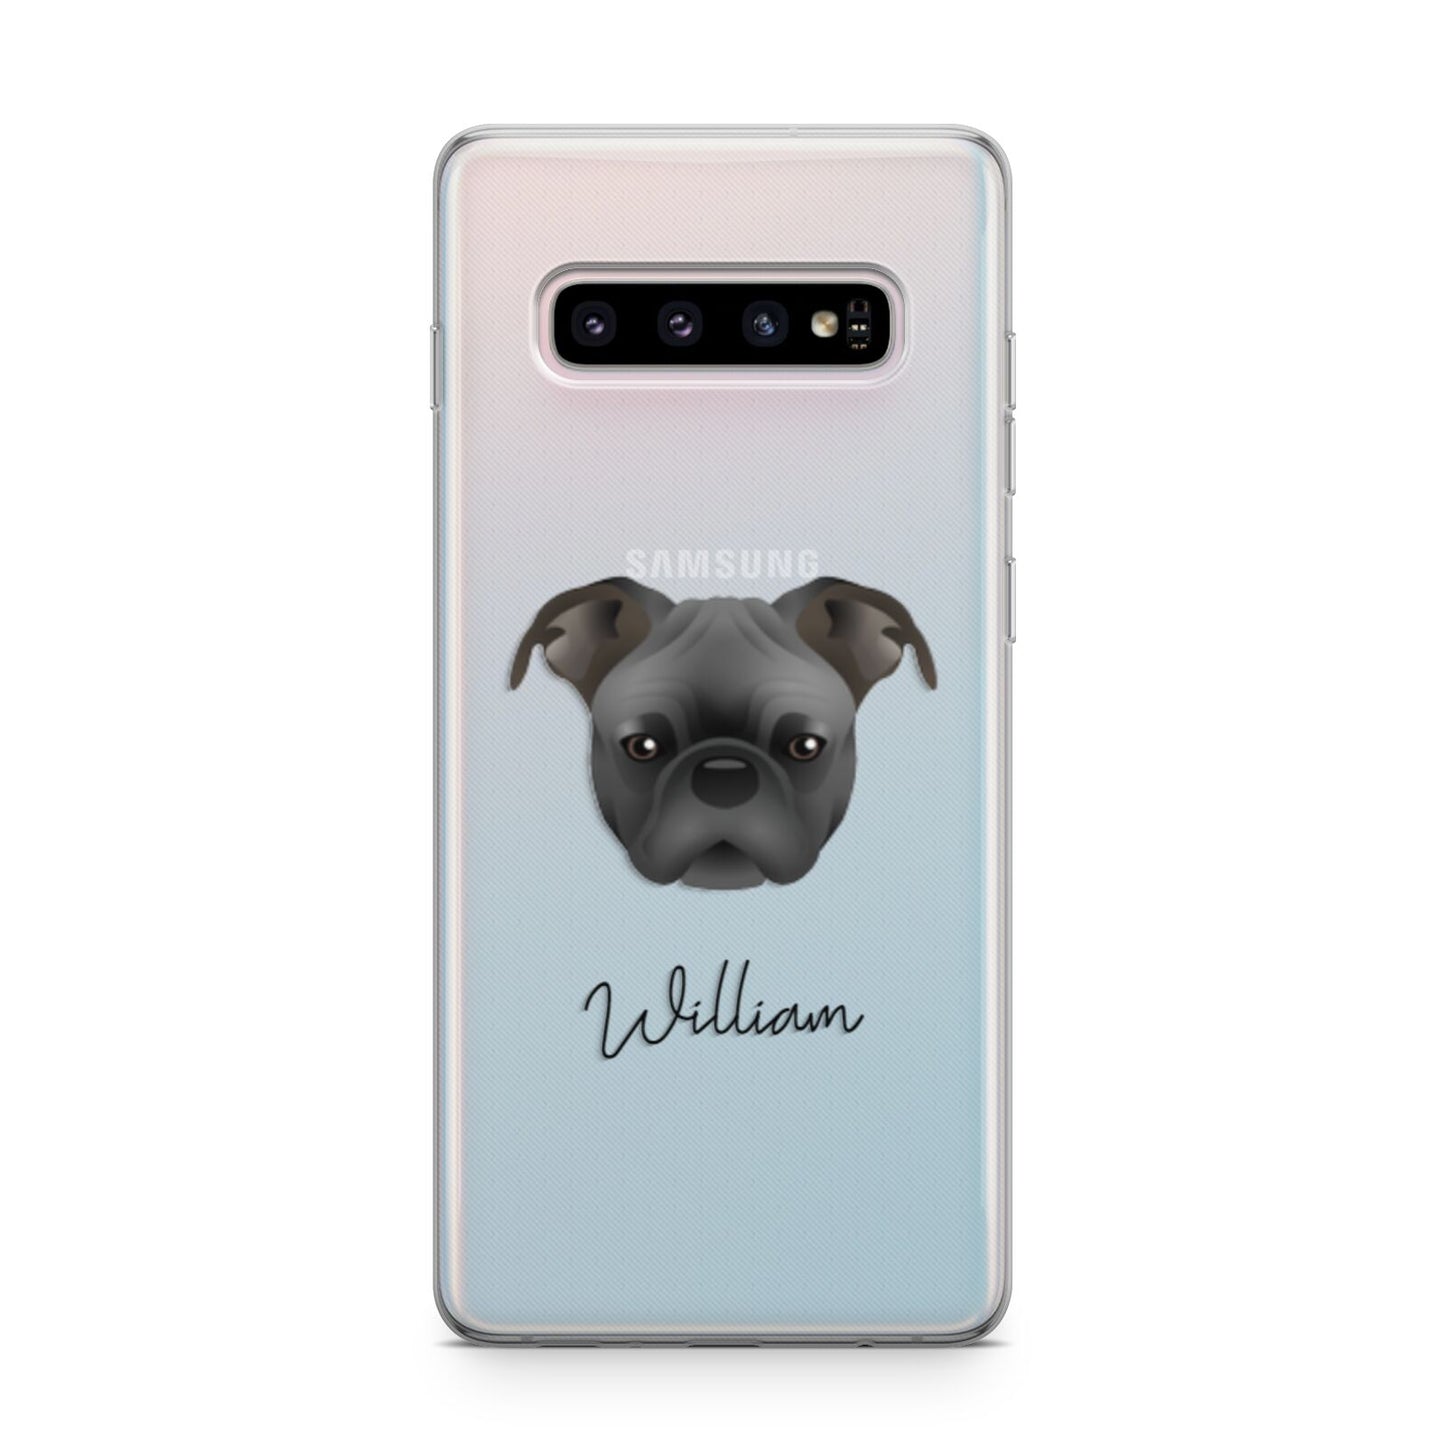 Bugg Personalised Samsung Galaxy S10 Plus Case